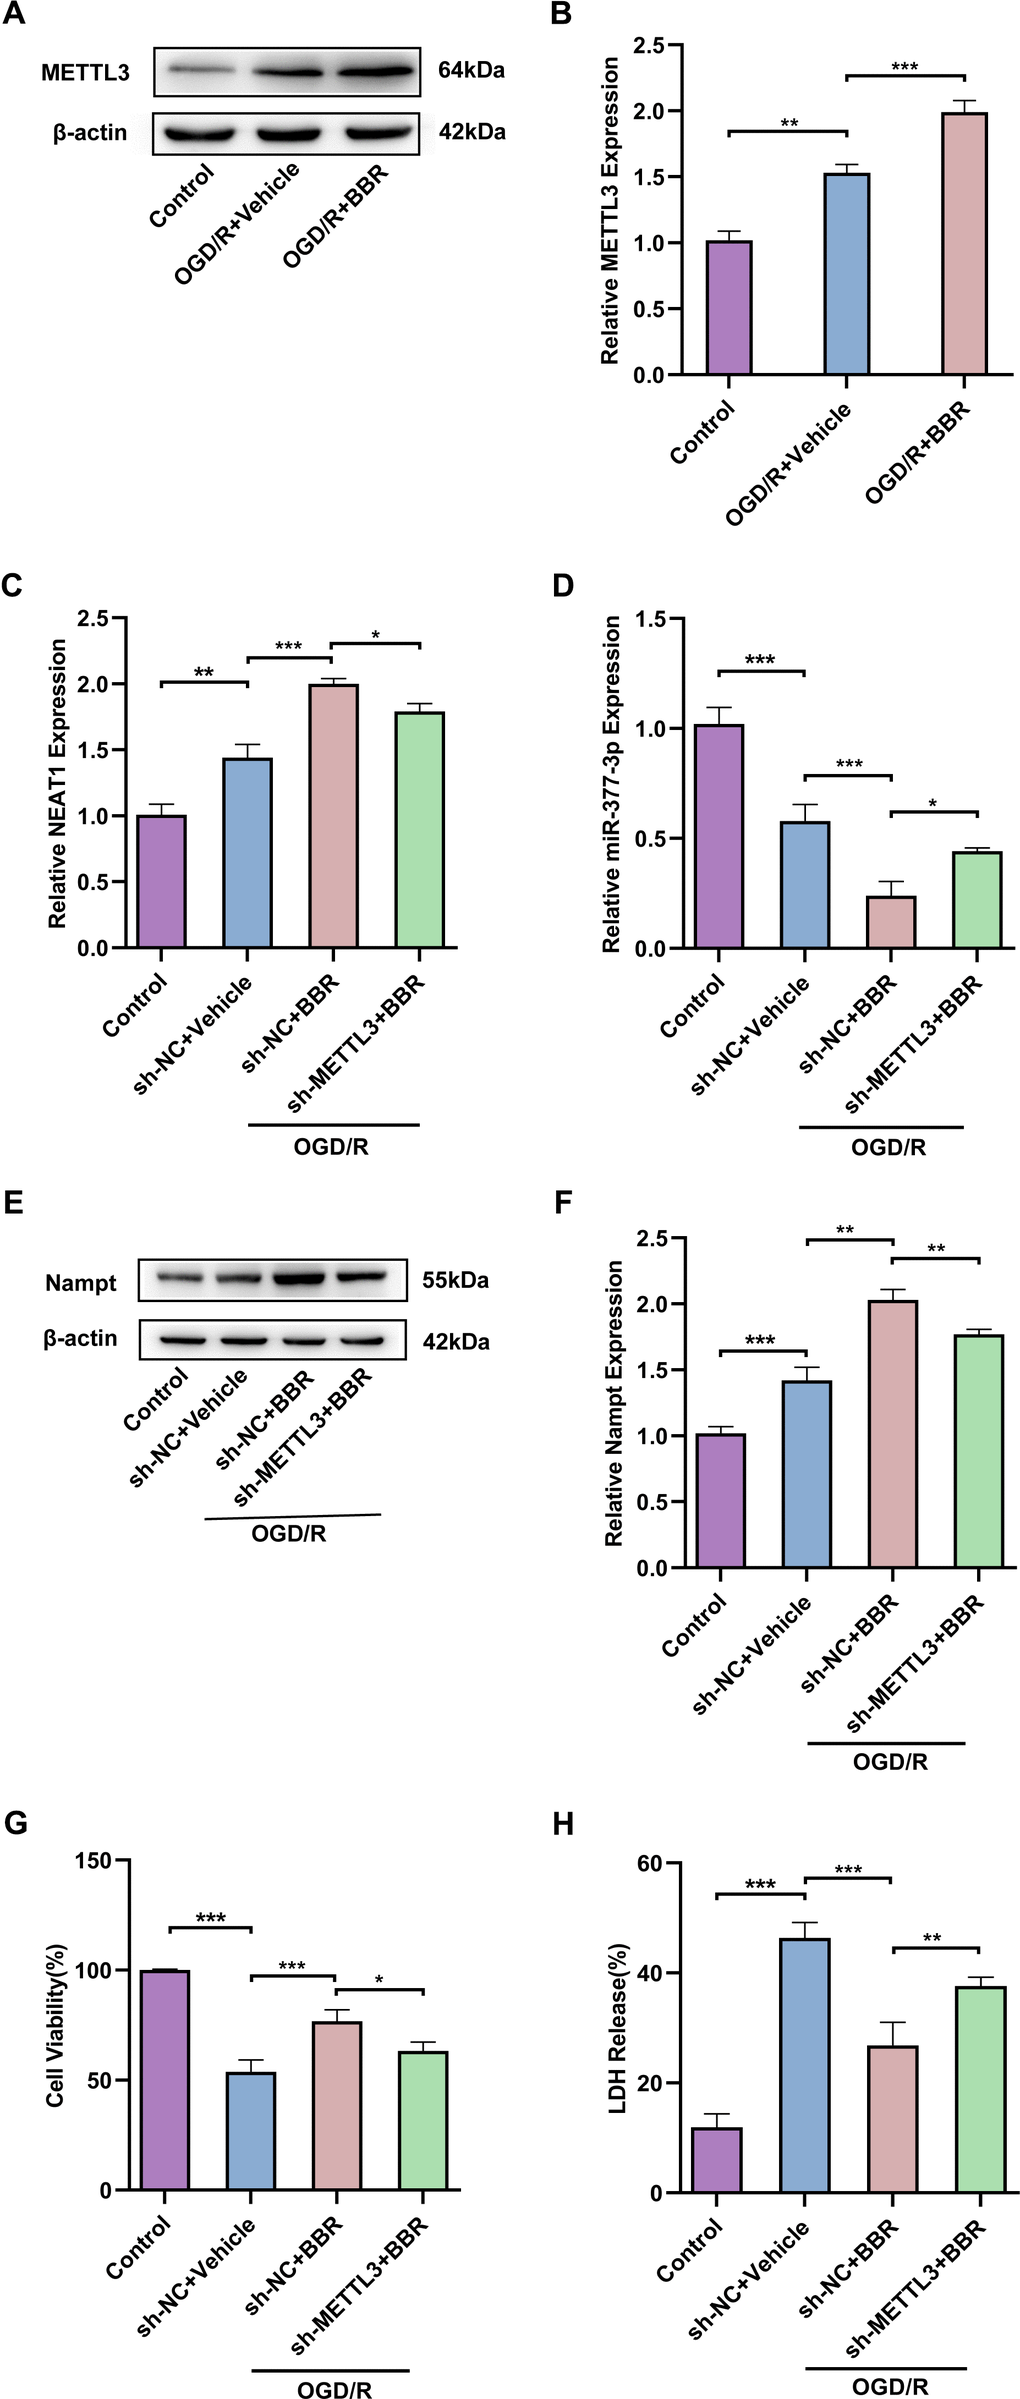 Berberine exerts neuroprotective effects via METTL3 regulating the NEAT1/miR-377-3p/Nampt axis in post-OGD/R primary astrocytes. (A) Western blot to detect expression of METTL3 in primary astrocytes after OGD/R and berberine treatment. (B) A bar presenting the quantification of METTL3 in primary astrocytes. (C) RT-qPCR to analysis the ex-pression of NEAT1 in primary astrocytes after OGD/R following berberine treatment and transfection with sh-METTL3. (D) RT-qPCR to analyze the expression of miR-377-3p in astrocytes after OGD/R following berberine treatment and transfection with sh-METTL3. (E) Western blotting to analyze the expression of Nampt in astrocytes after OGD/R following berberine treatment and transfection with sh-METTL3. (F) A bar presenting the quantification of Nampt in primary astrocytes. (G) Using CCK-8 assay to assess the effect on co-cultured neurons by treating with sh-METTL3 and berberine-treated primary astrocytes and OGD/R treatment. (H) Using LDH assay to evaluate the effect on co-cultured neurons by treating with sh-METTL3 and berberine-treated primary astrocytes and OGD/R treatment. The relative expression levels were quantified by normalizing to β-actin. Data are represented as mean ± SD, (n = 3; *P P P 